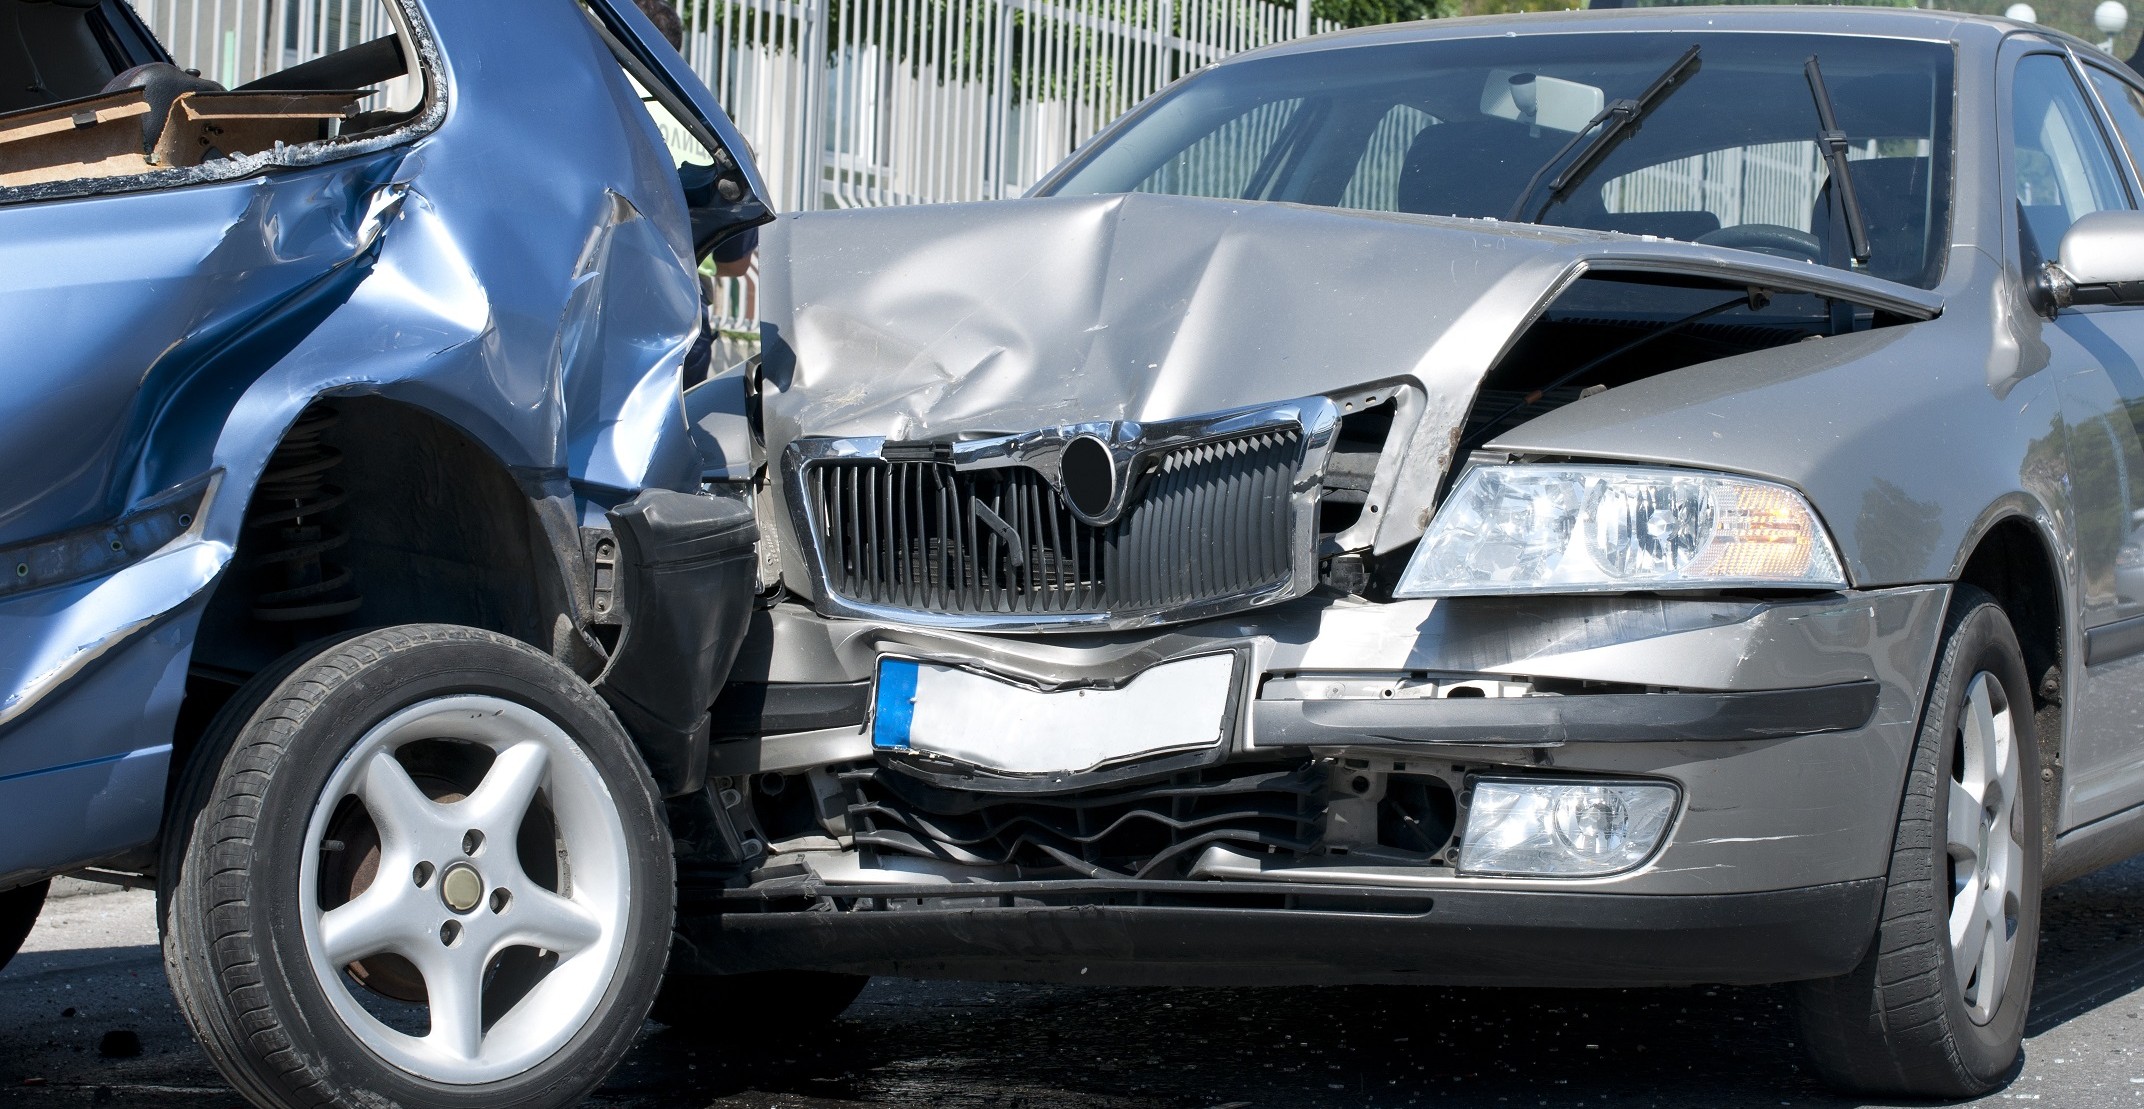 Boston Car Accident Lawyers - Crowe & Mulvey, LLP